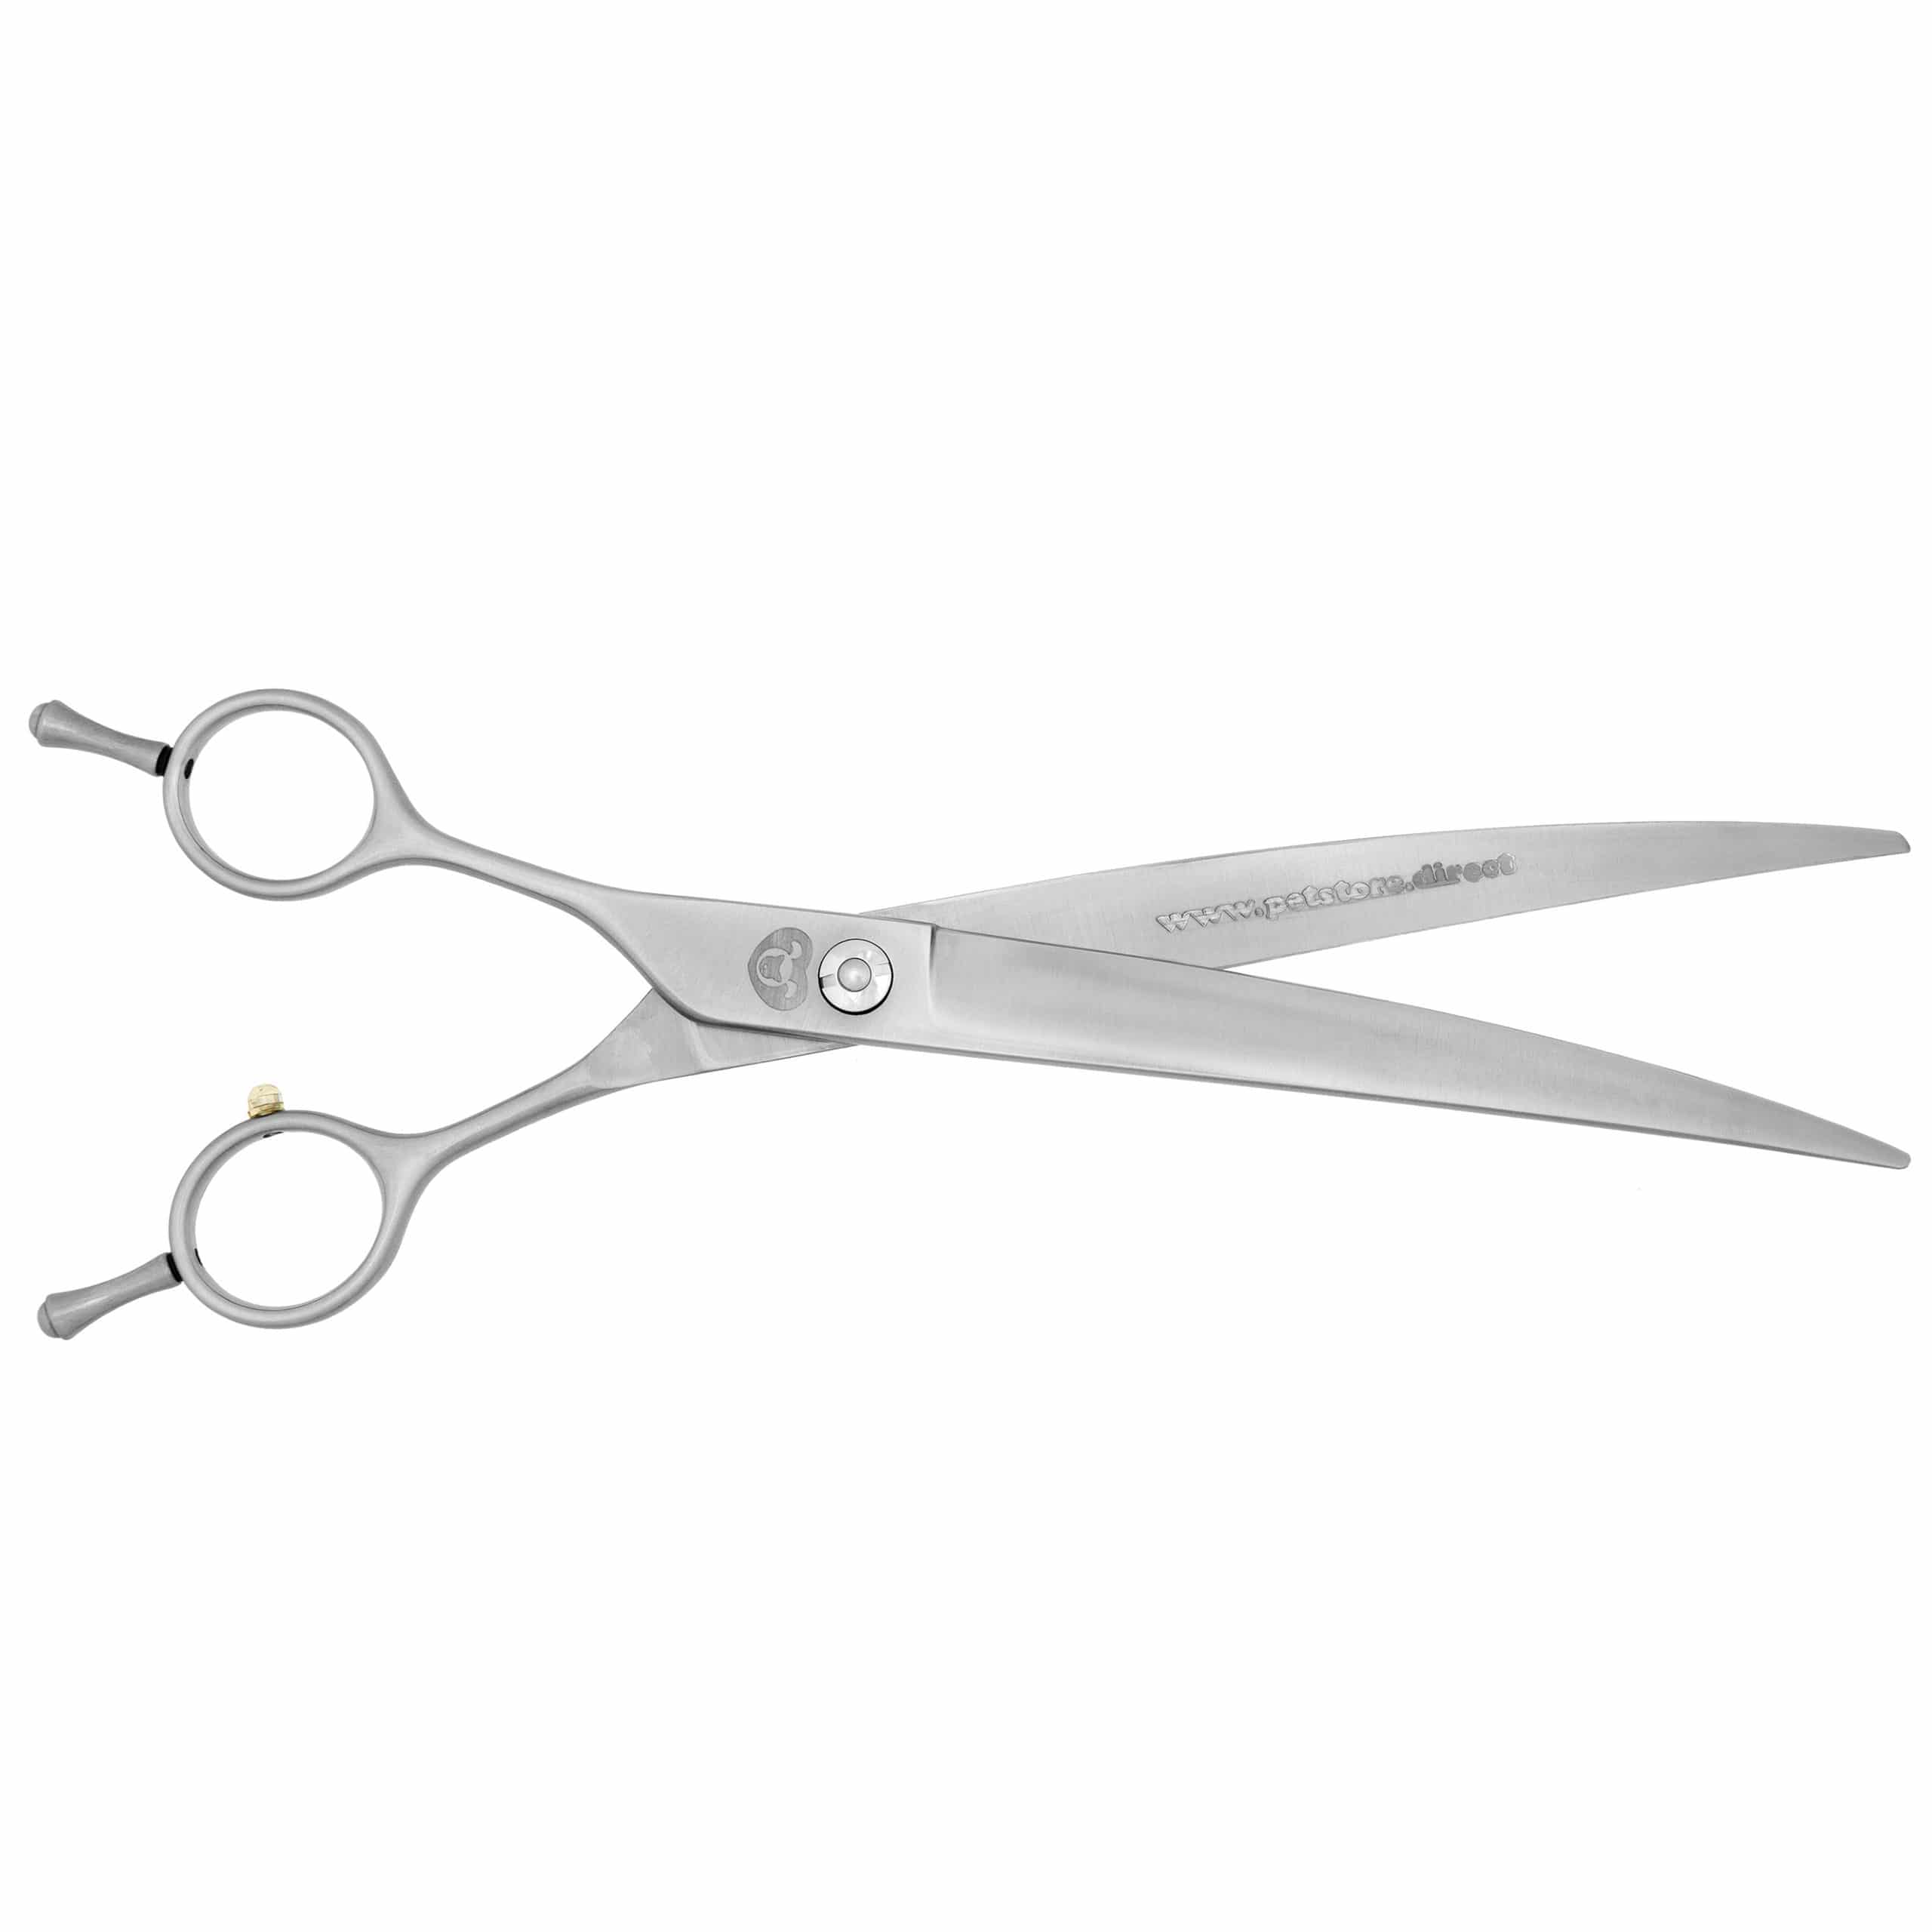 7 Premium Curve Left-Handed Grooming Shears